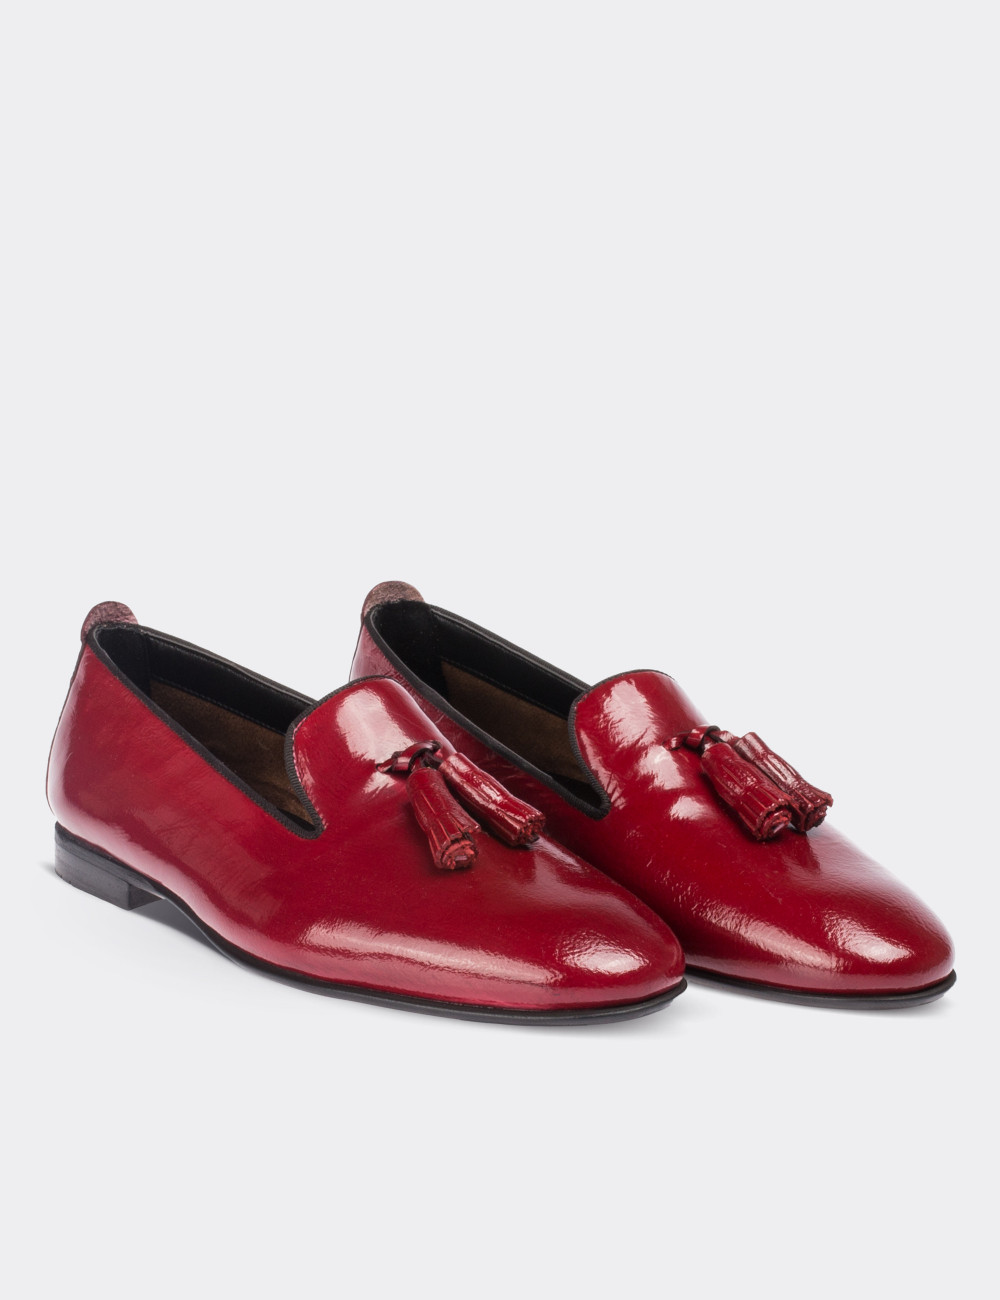 Burgundy Patent Leather Loafers - Deery